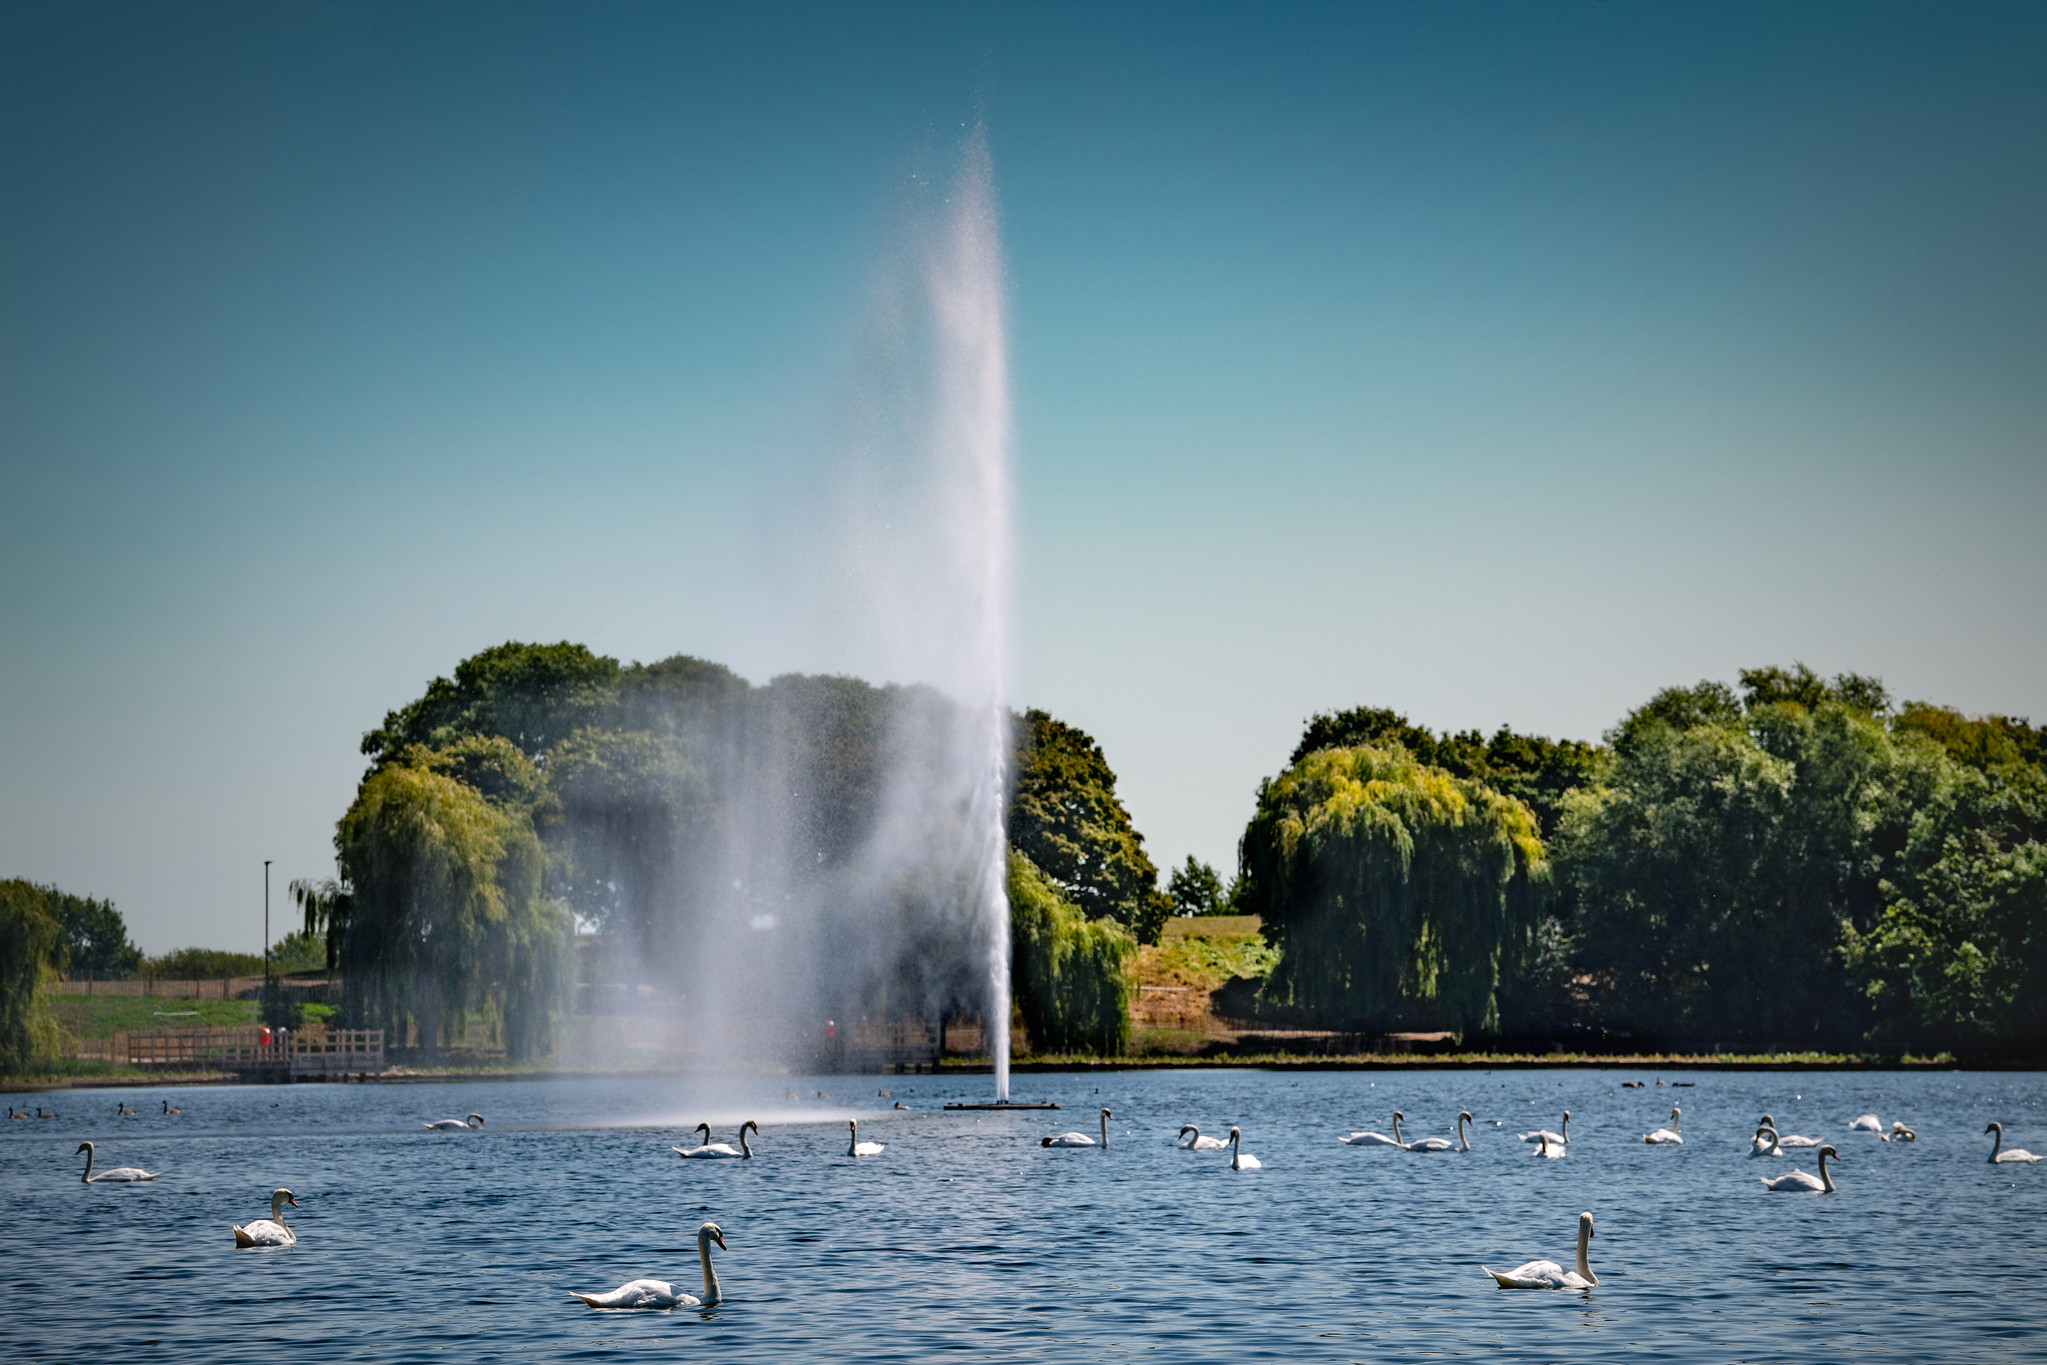 An Otterbine giant fountain spraying water high in the air above a lake full of swans.